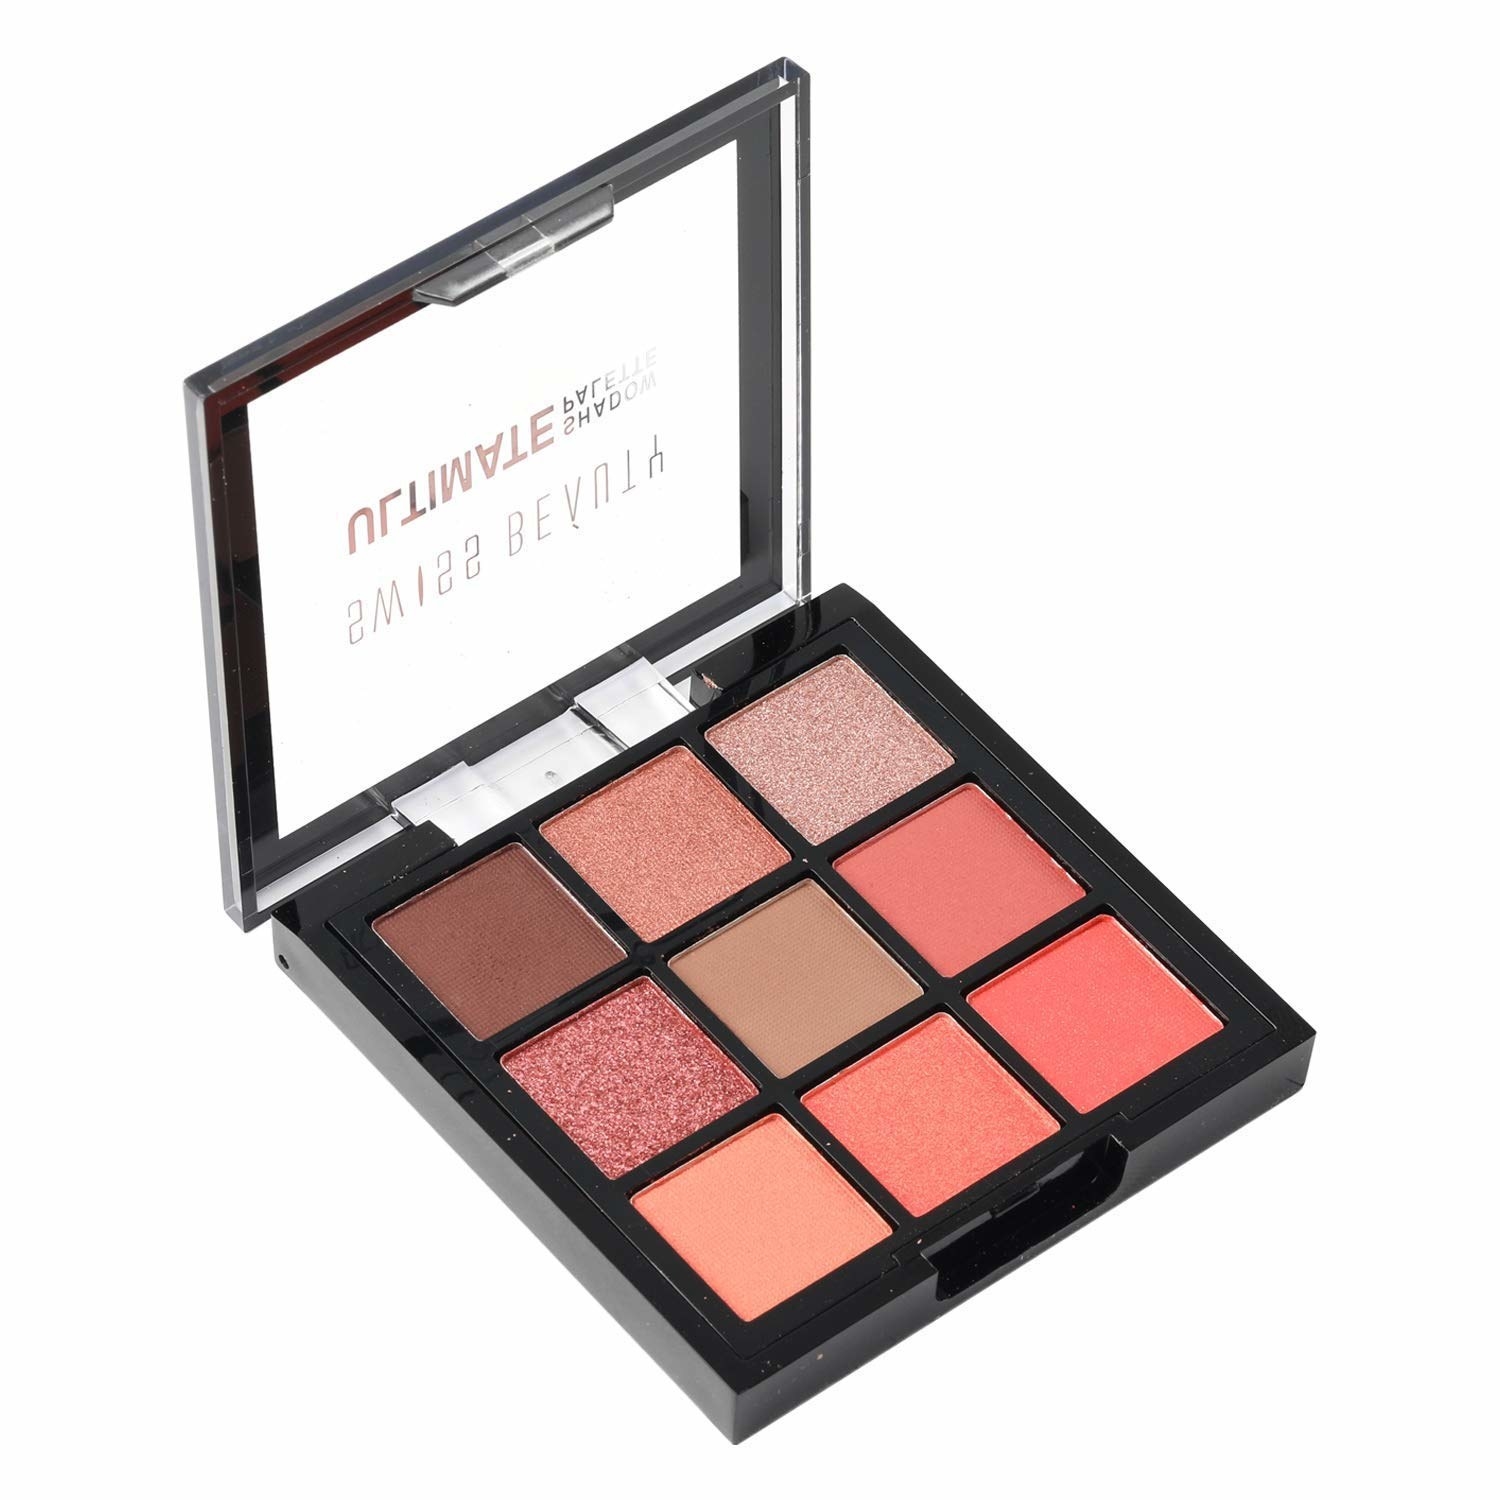 The palette has nude, pink, and brown shades in both matte and shimmery finishes